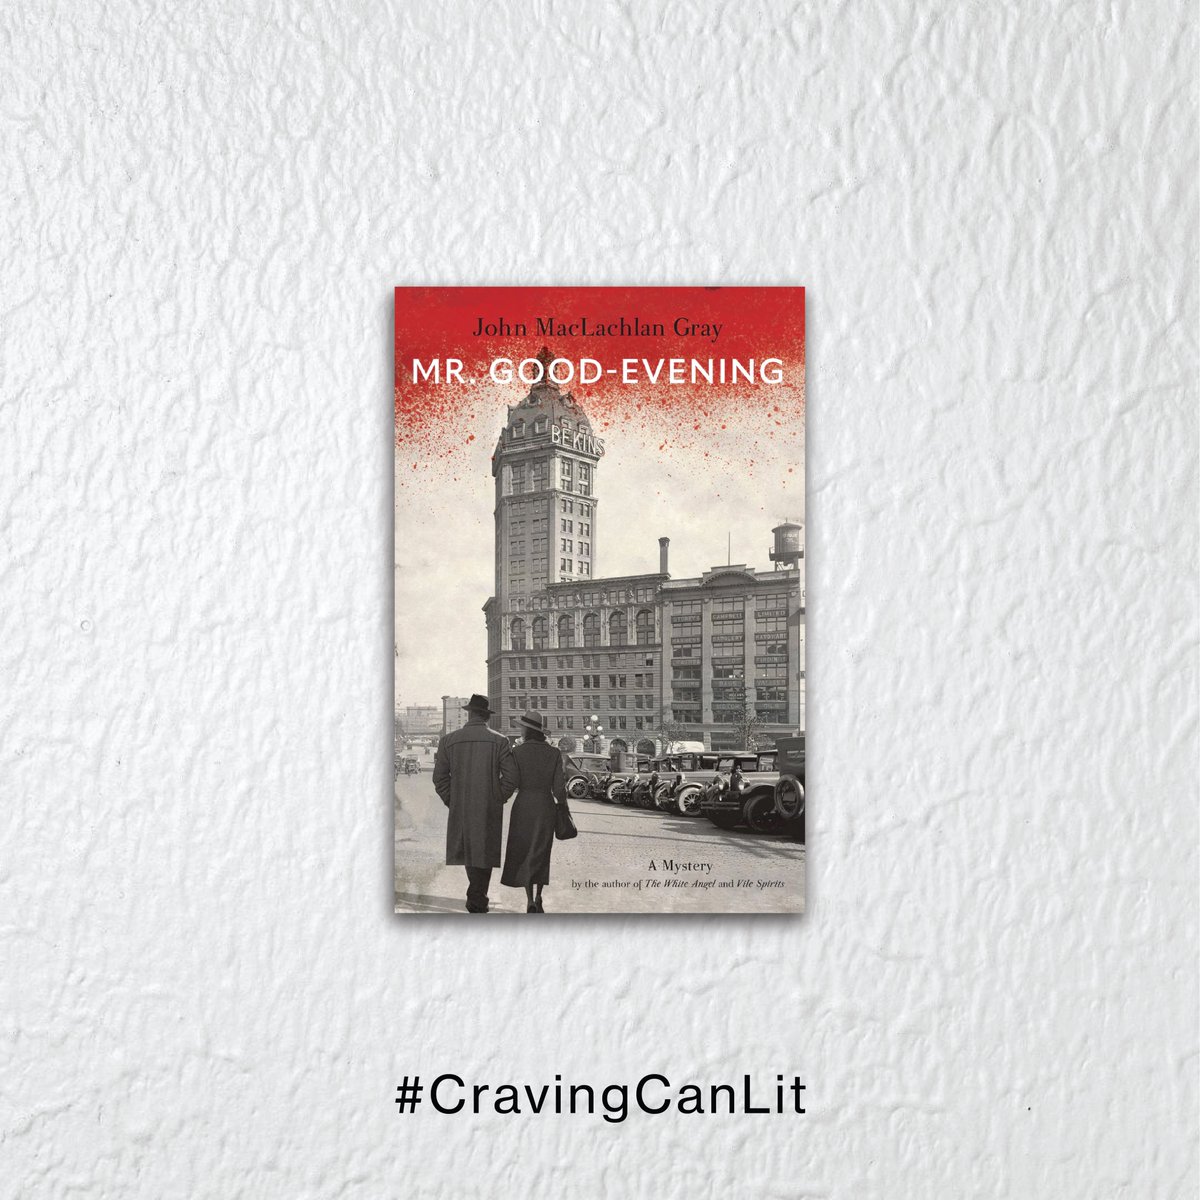 John MacLachlan Gray’s latest Raincoast Noir mystery is out today. Pick up a copy of Mr. Good-Evening, published by @DMPublishers. #CravingCanLit